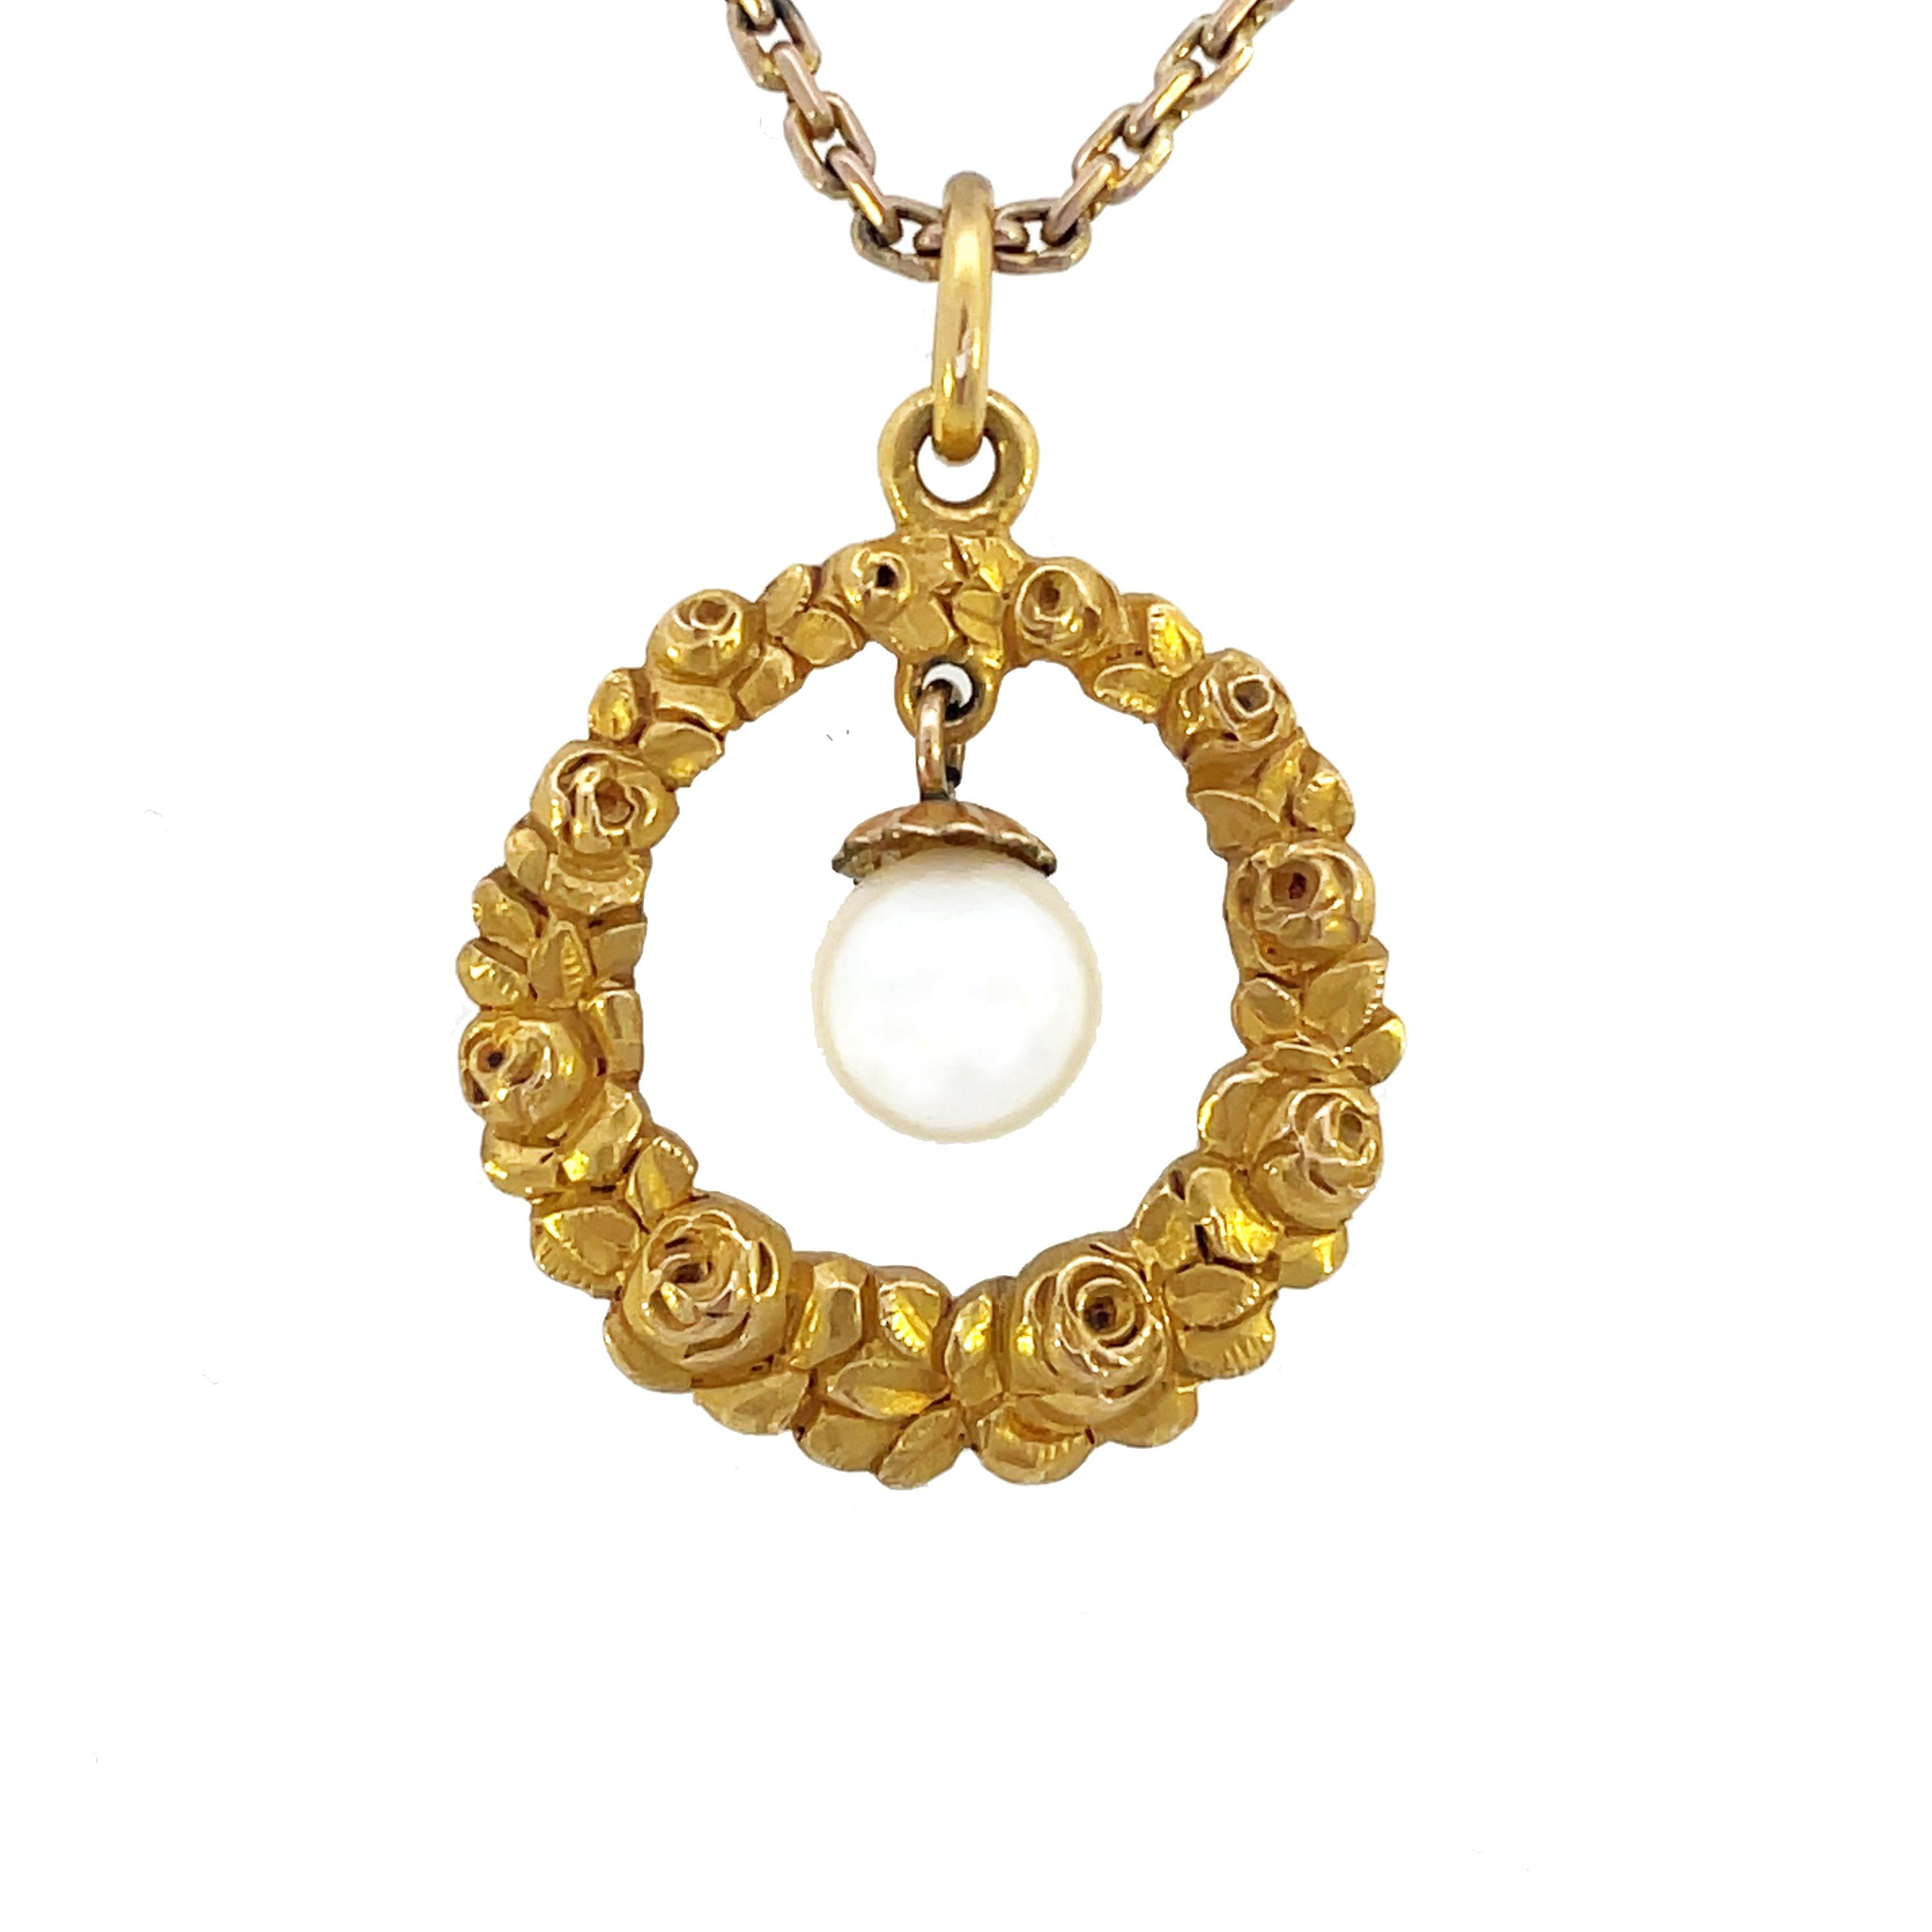 This is an exquisite Edwardian pendant crafted in glowing 14K yellow gold that features a lovely rose motif framing an articulated pearl at the center. This pendant is elegant and classy and would be an excellent addition to your jewelry wardrobe.